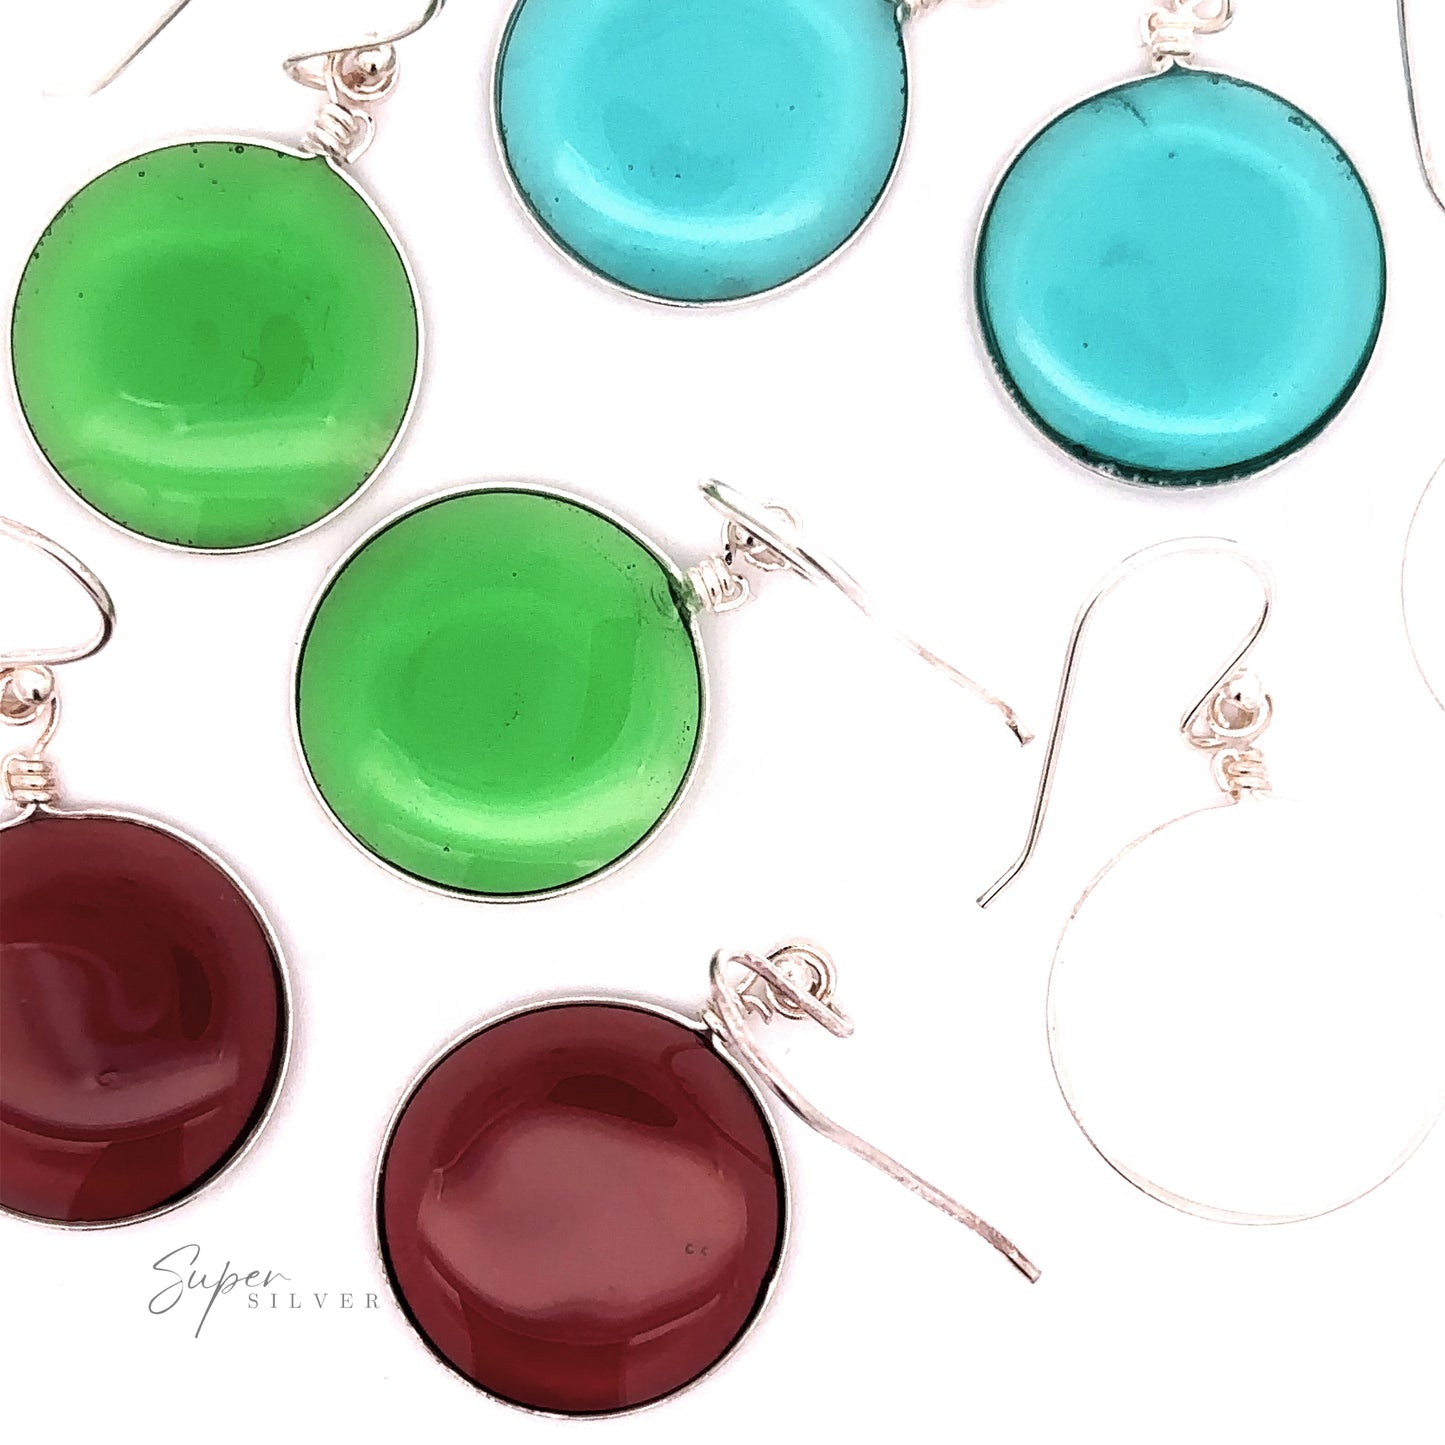 
                  
                    A simple set of Round Glass Earrings in shades of green, blue, and red, each with .925 Sterling Silver hooks, displayed against a white background.
                  
                